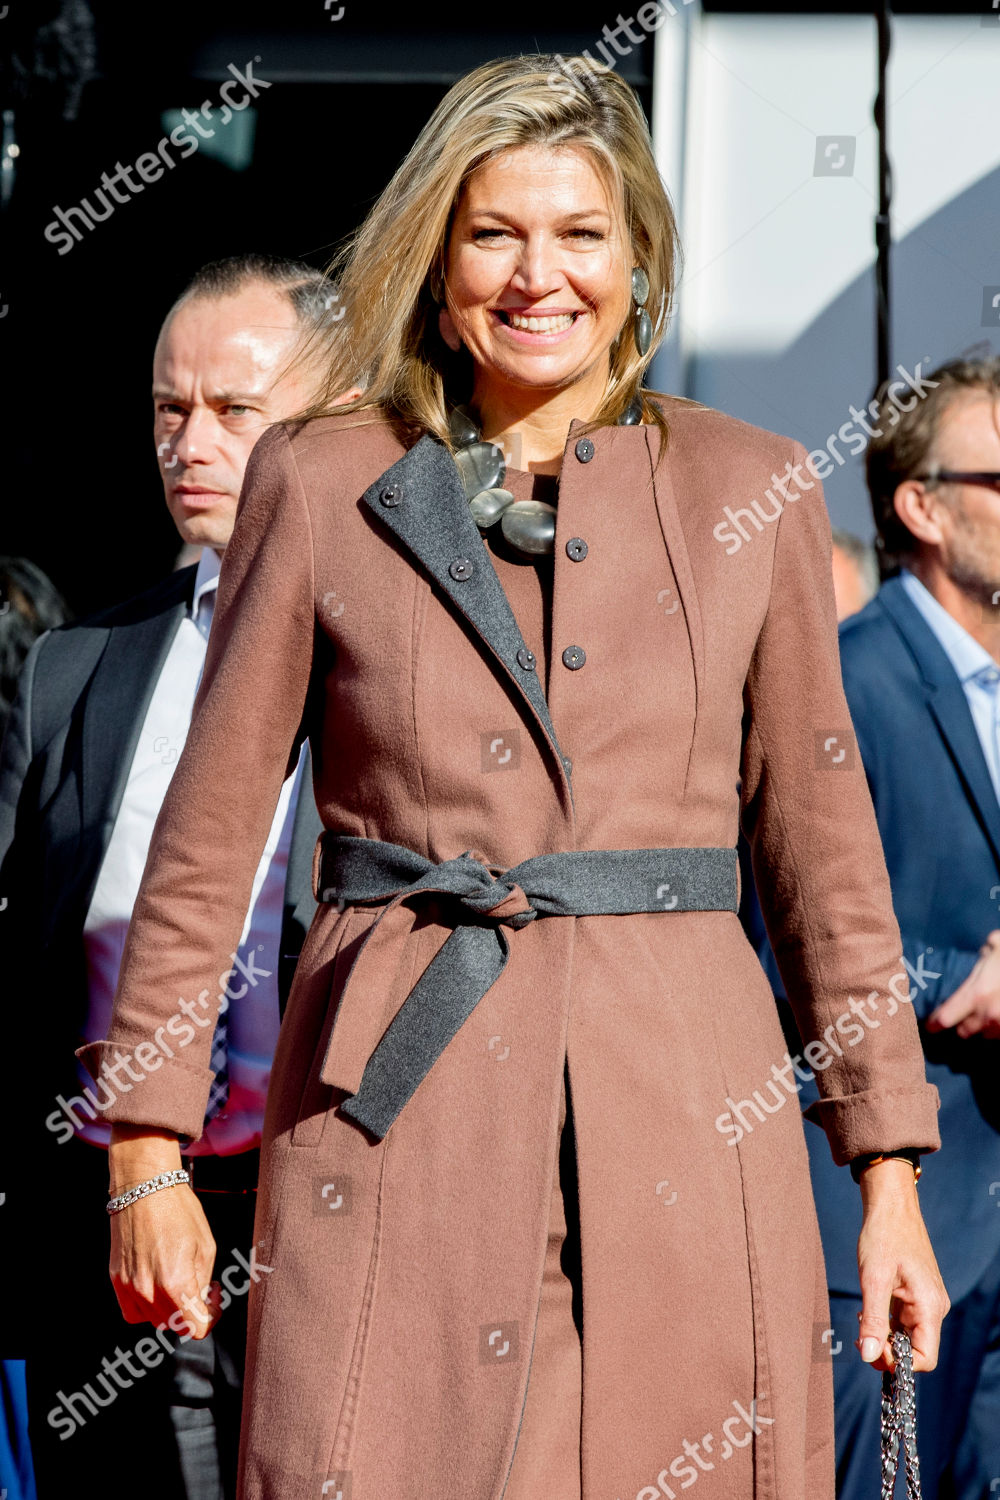 queen-maxima-visit-to-113-suicide-prevention-amsterdam-the-netherlands-shutterstock-editorial-9958922af.jpg